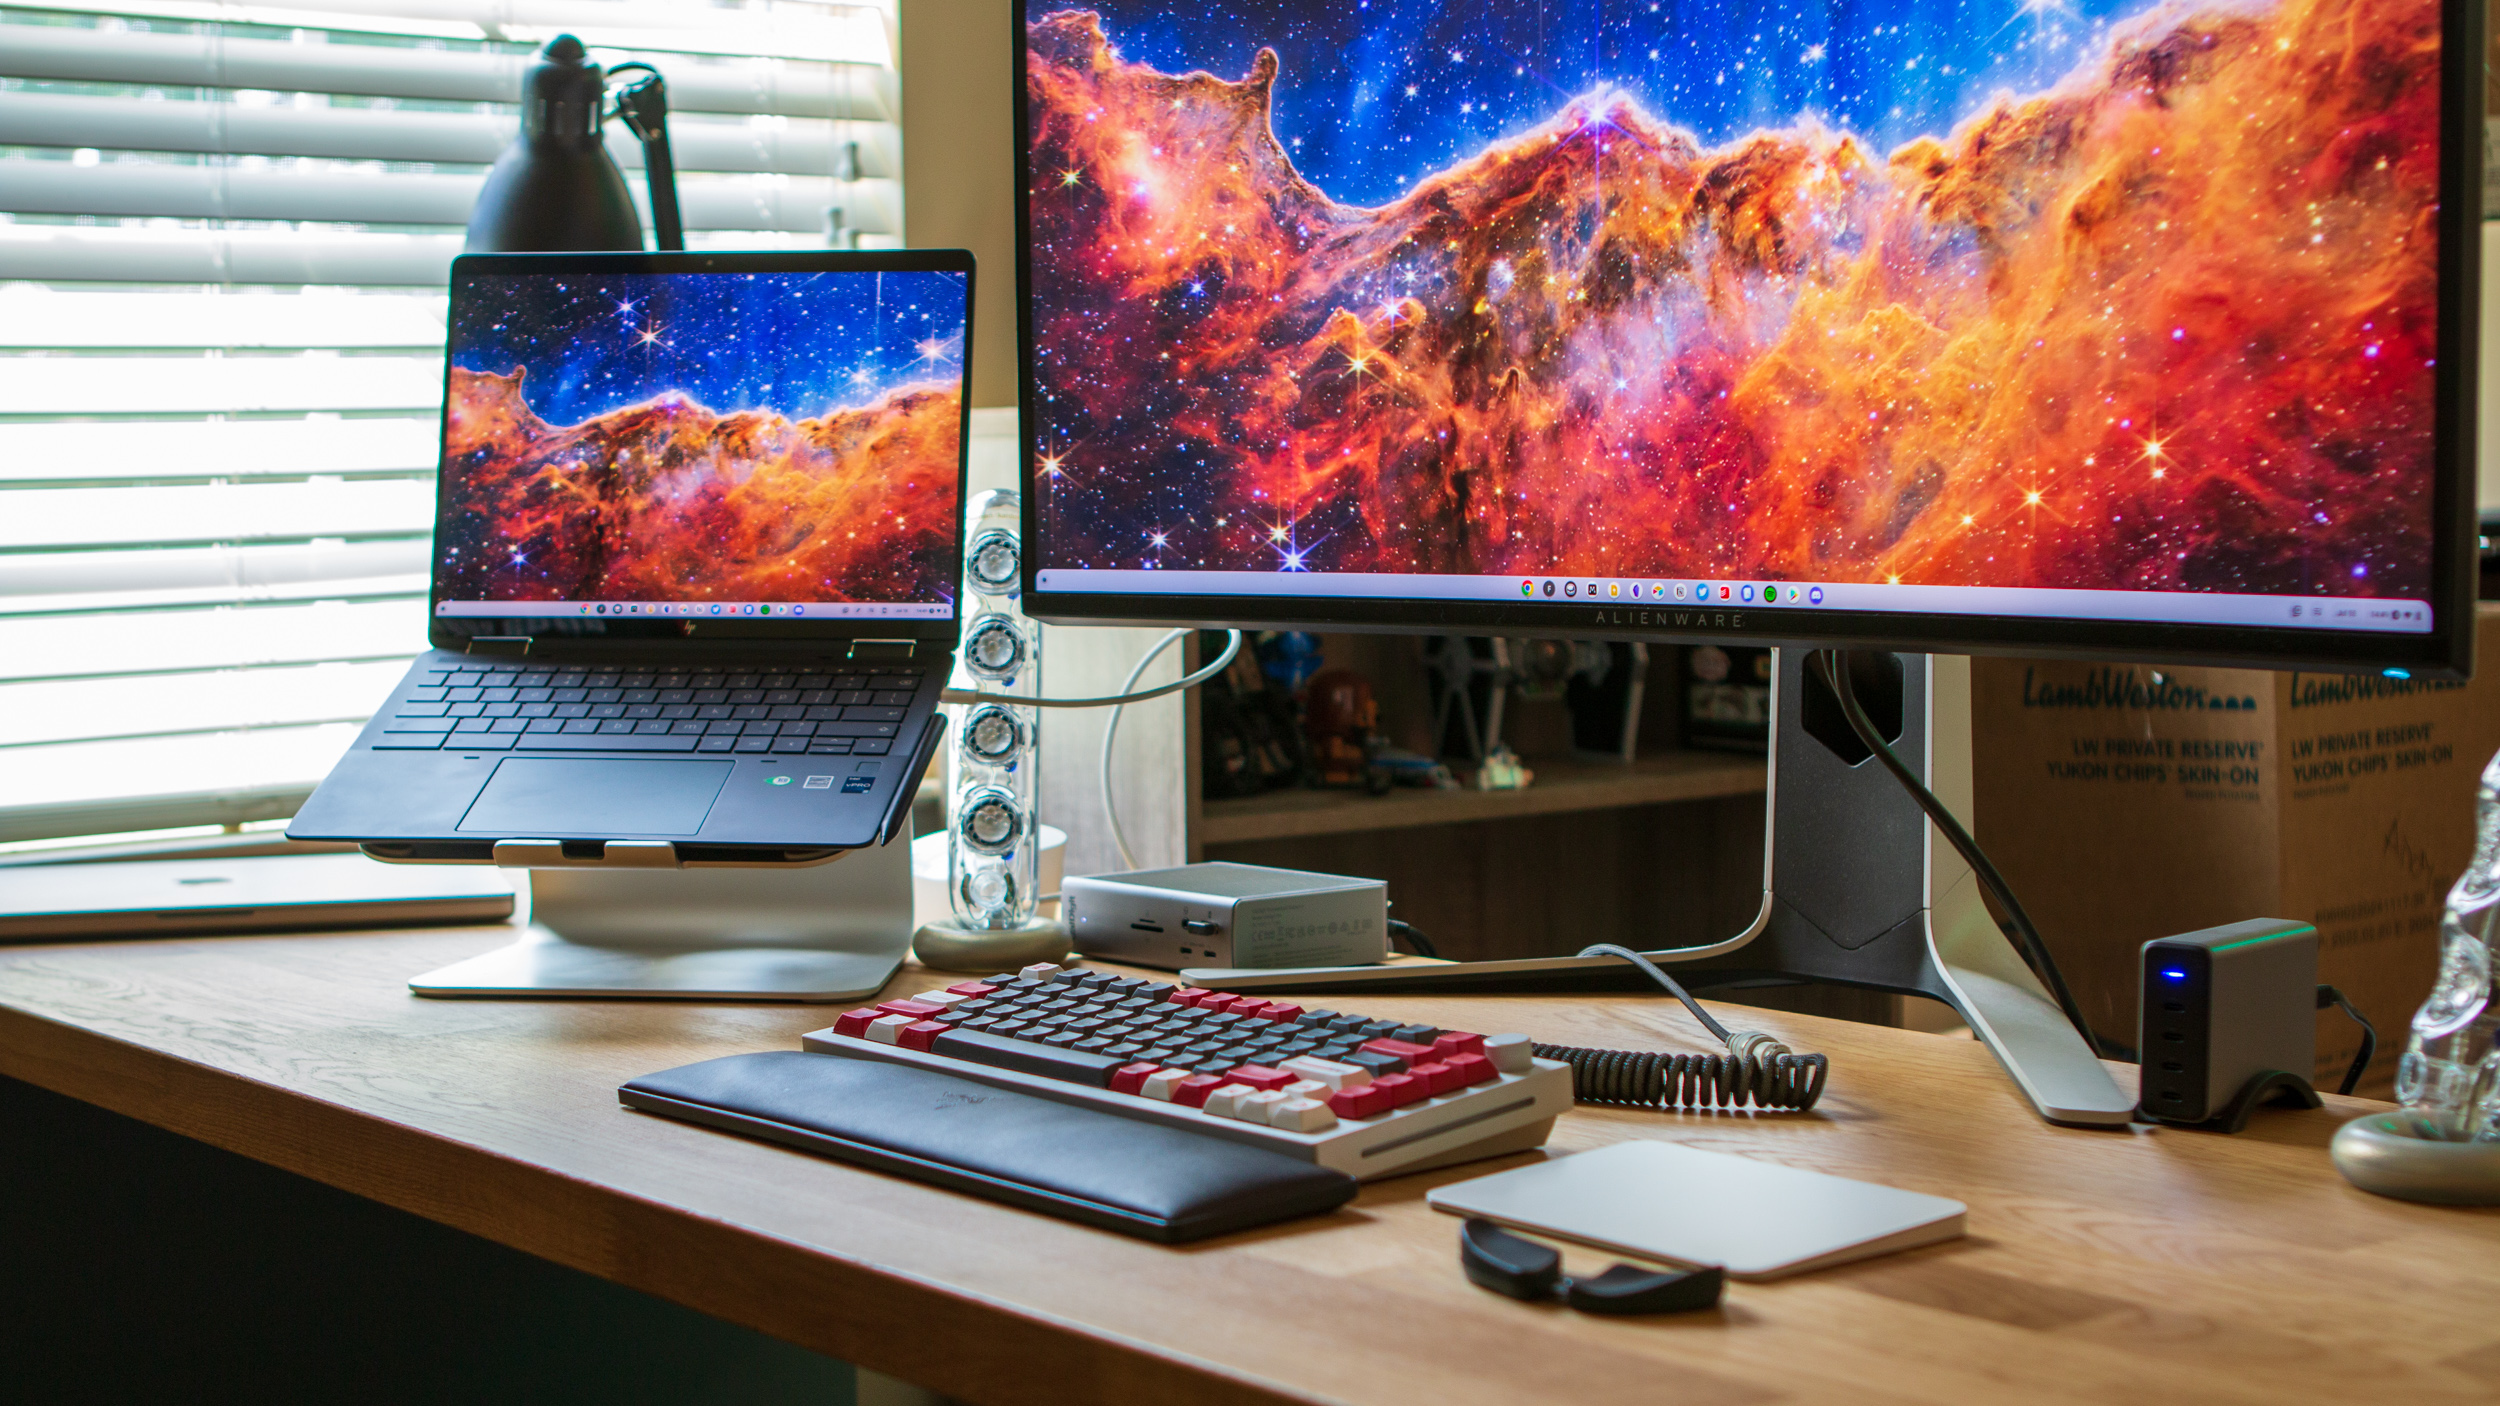 HP Elite Dragonfly Chromebook in a stand connected to an Ultrawide monitor